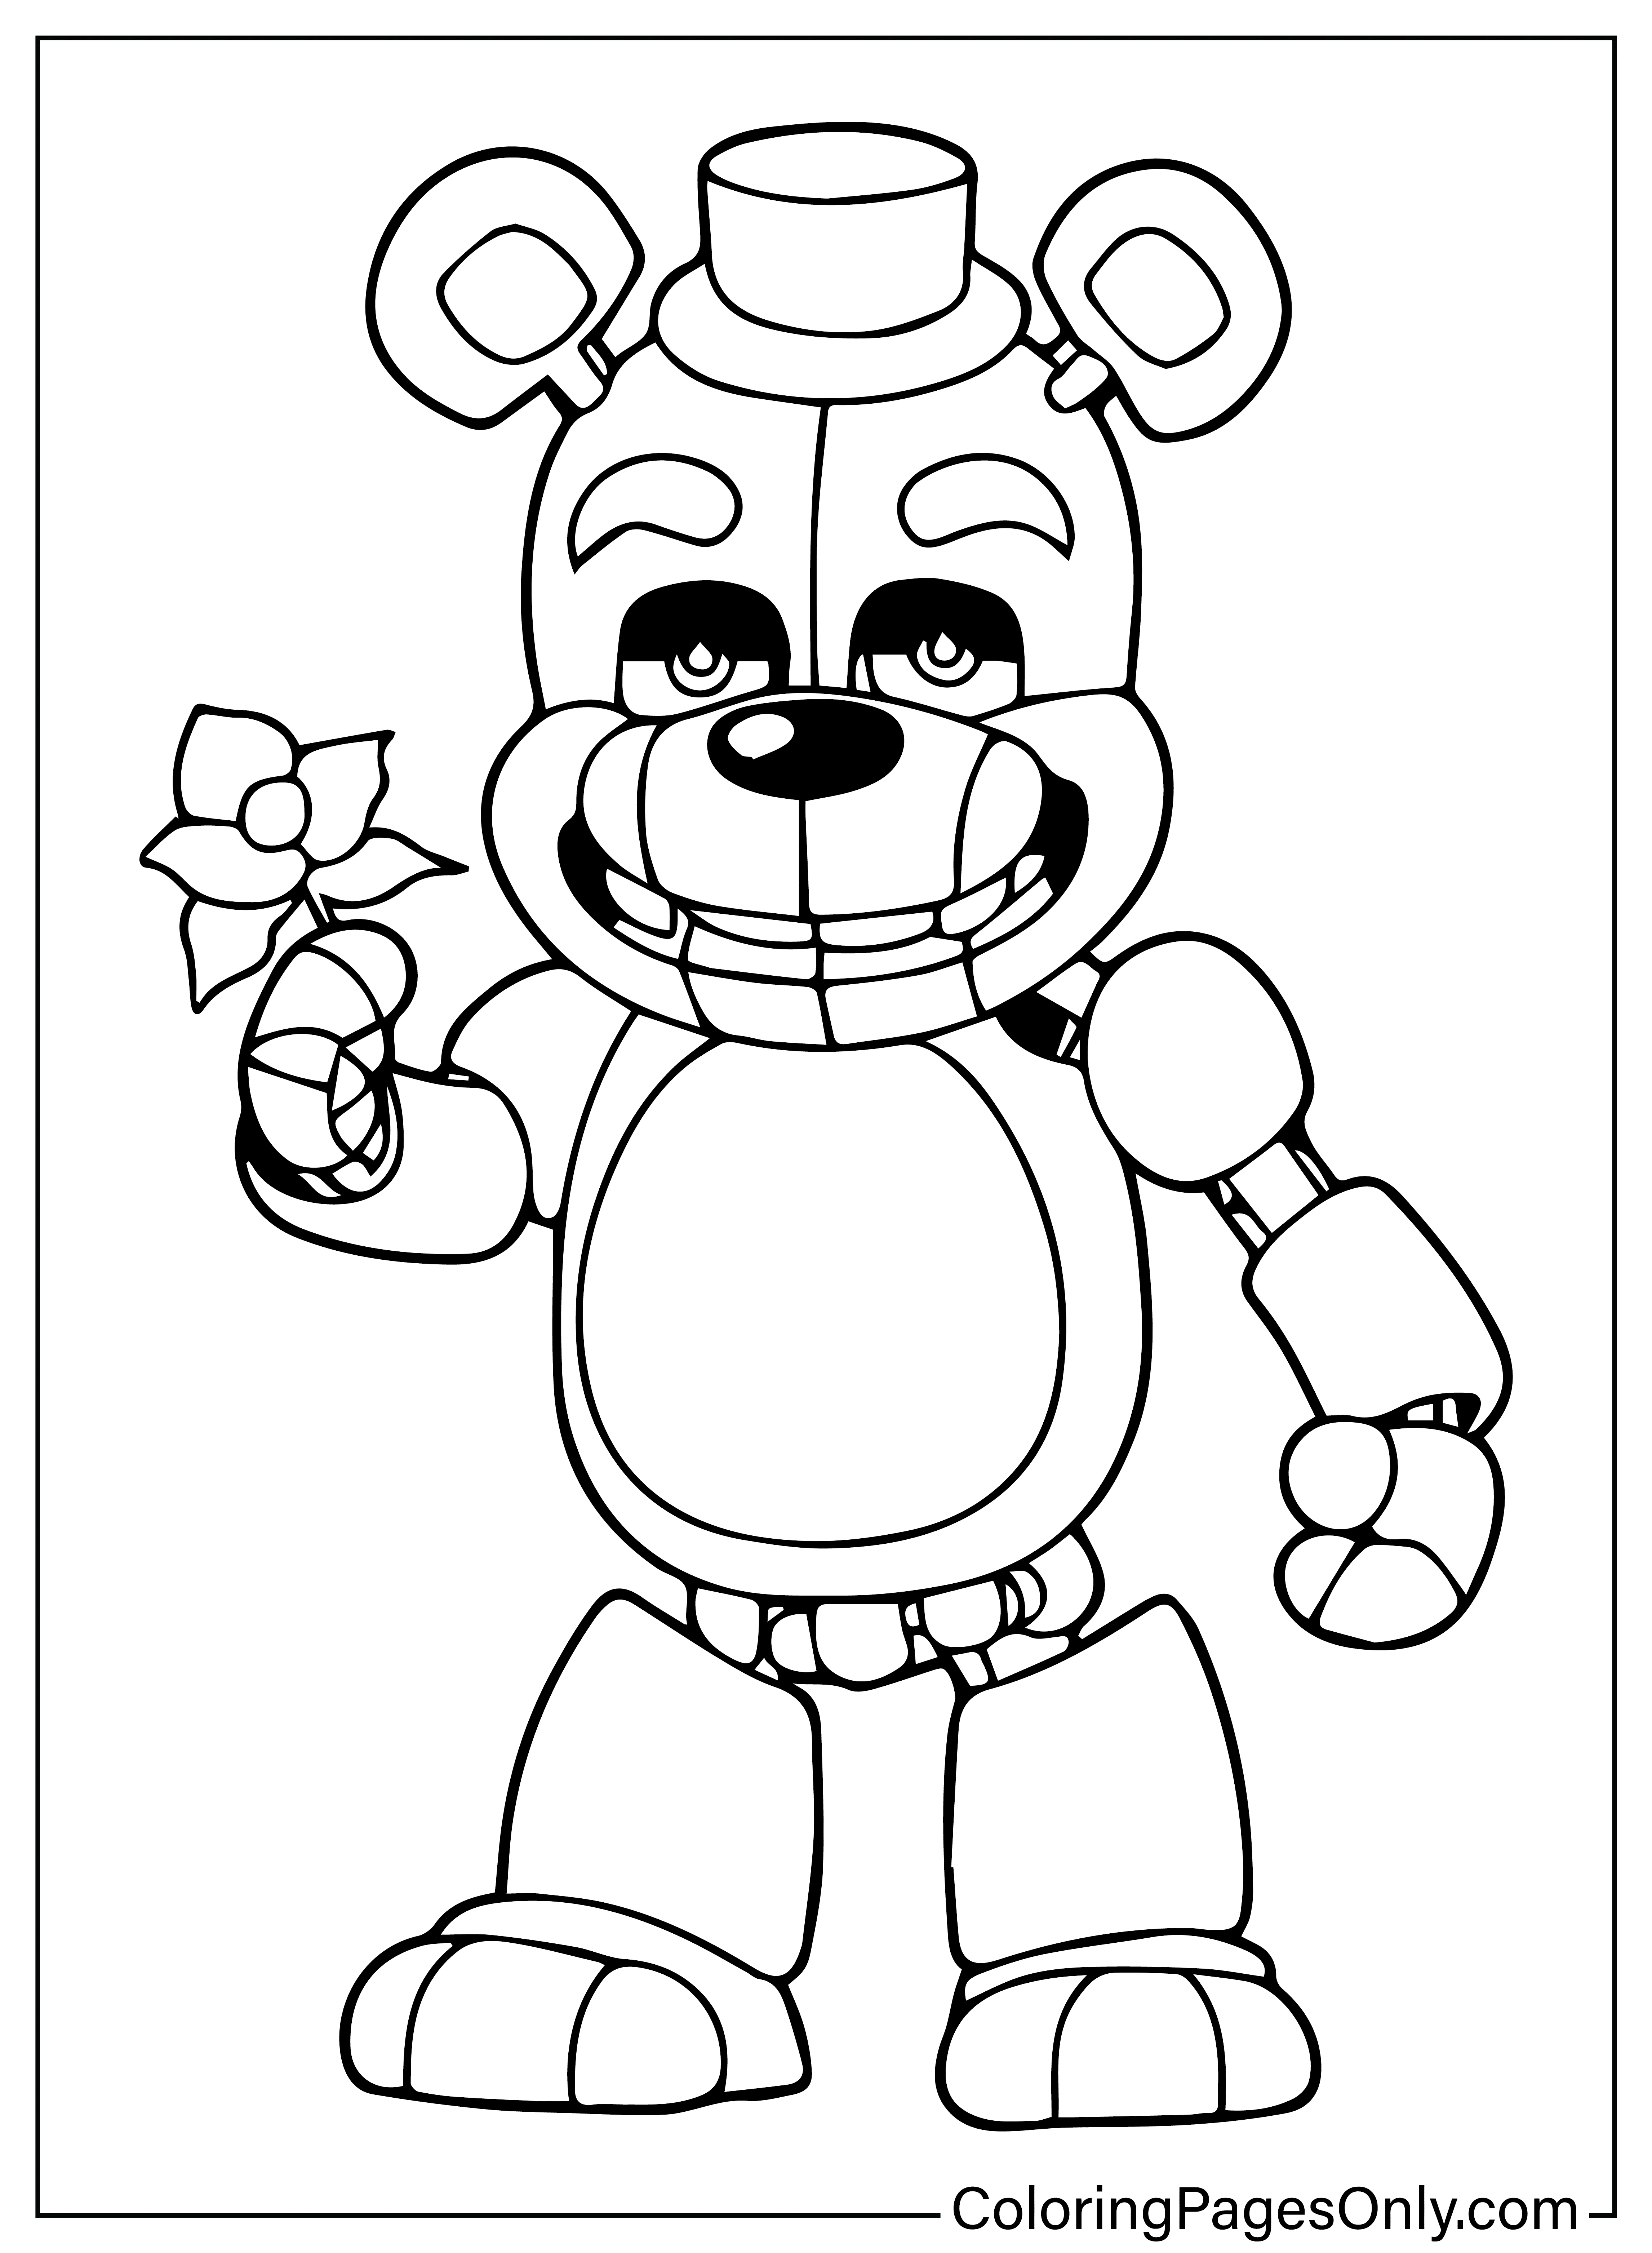 Freddy Fazbear Coloring Page PNG